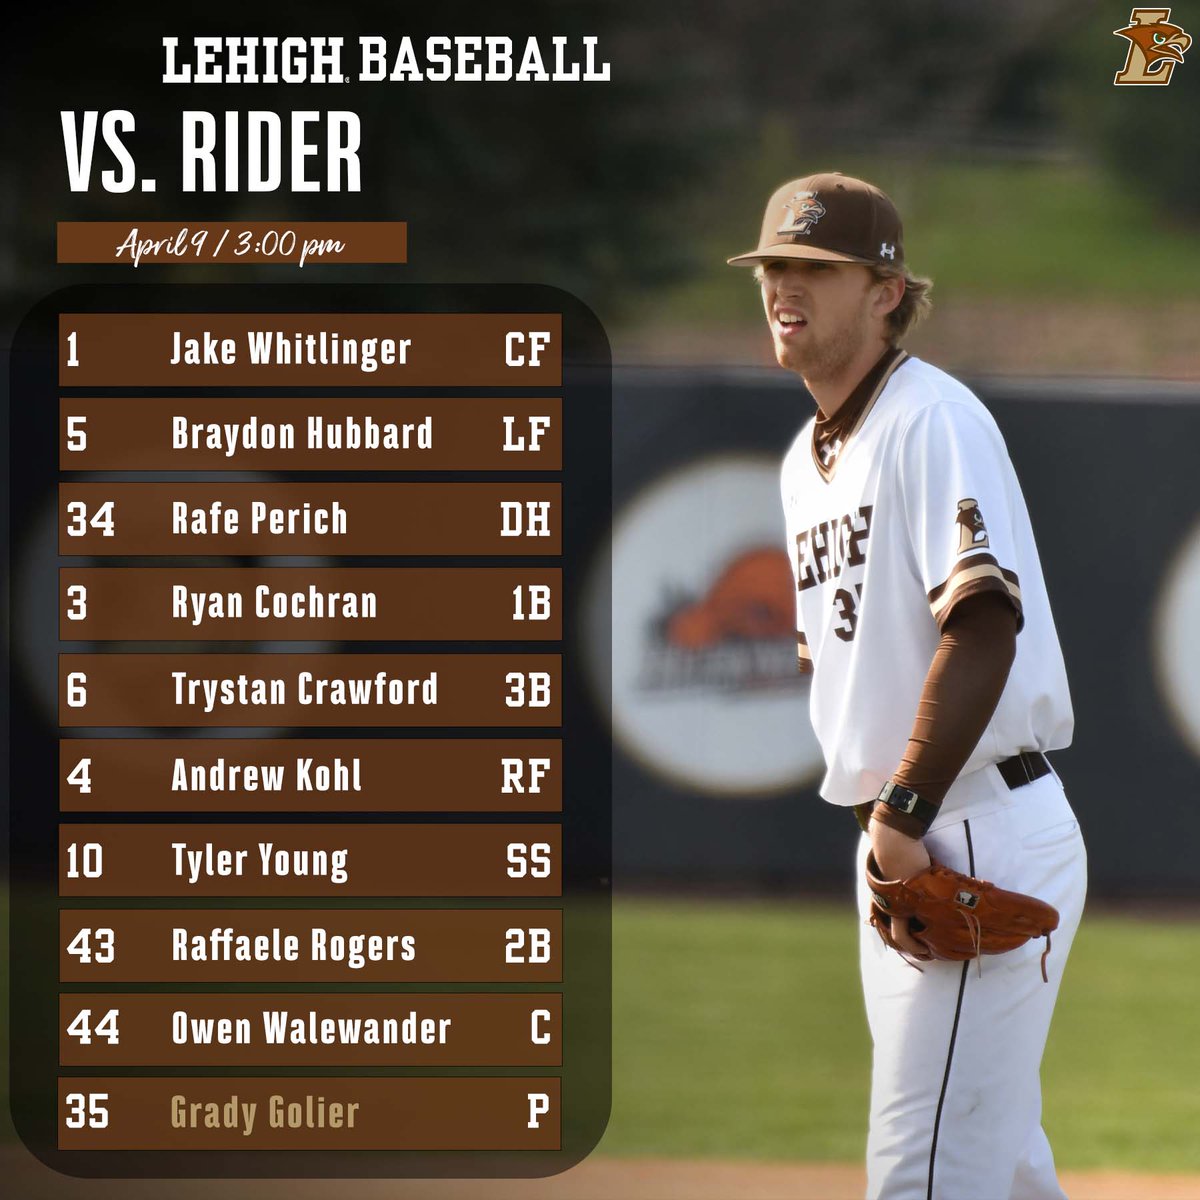 Here's how we're lining up for today's Liberty Bell Classic clash! 📺 bitly.ws/3hHch #GoLehigh